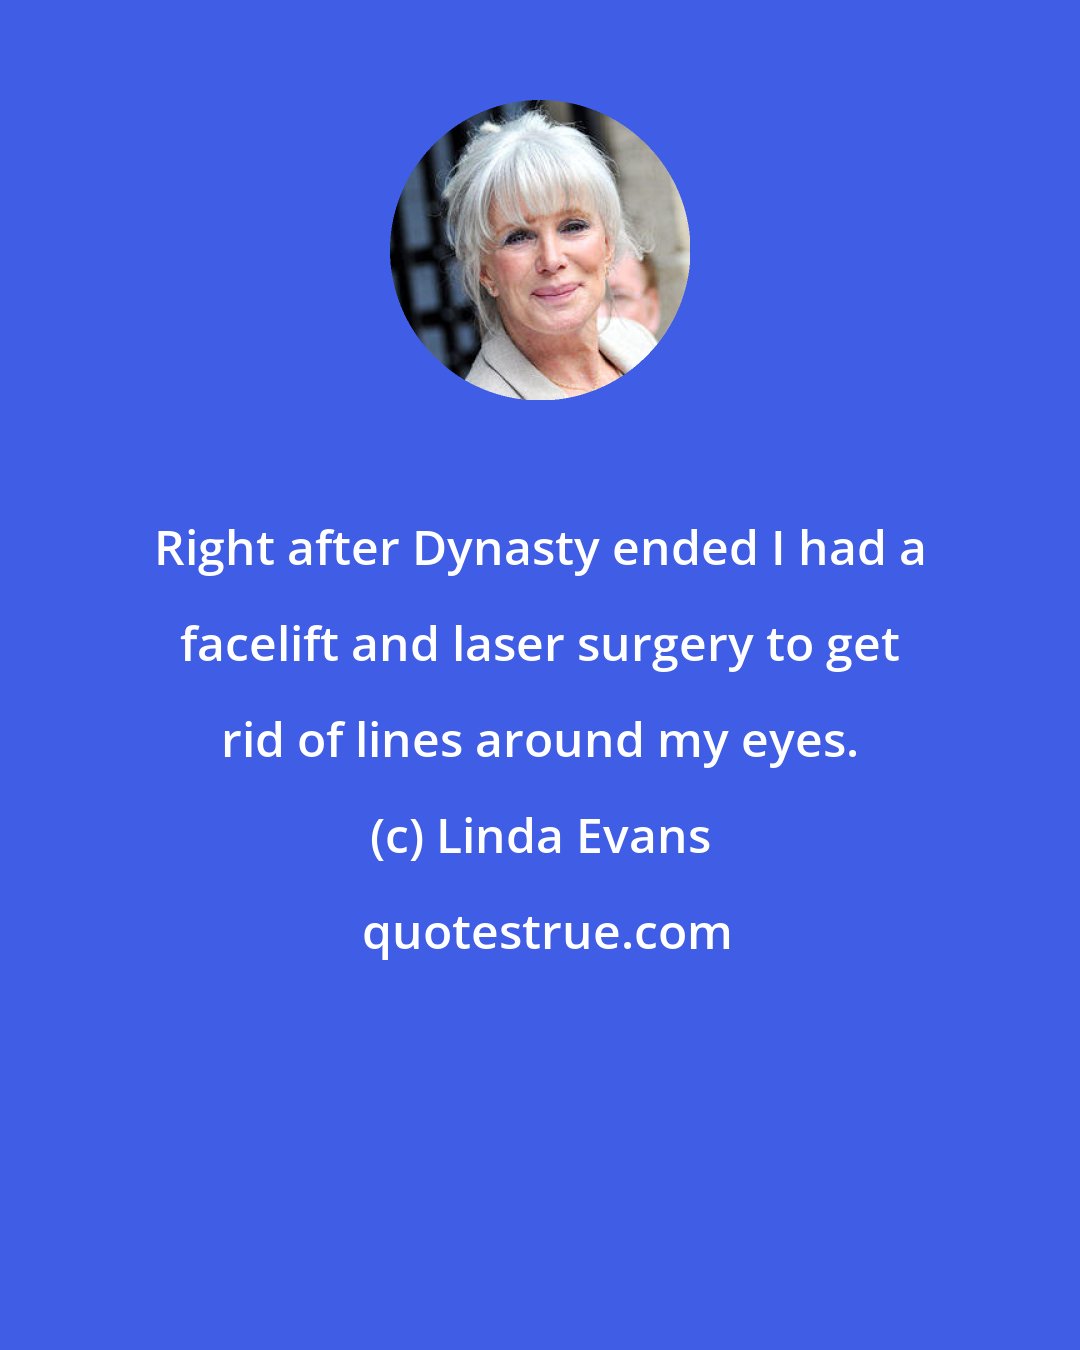 Linda Evans: Right after Dynasty ended I had a facelift and laser surgery to get rid of lines around my eyes.